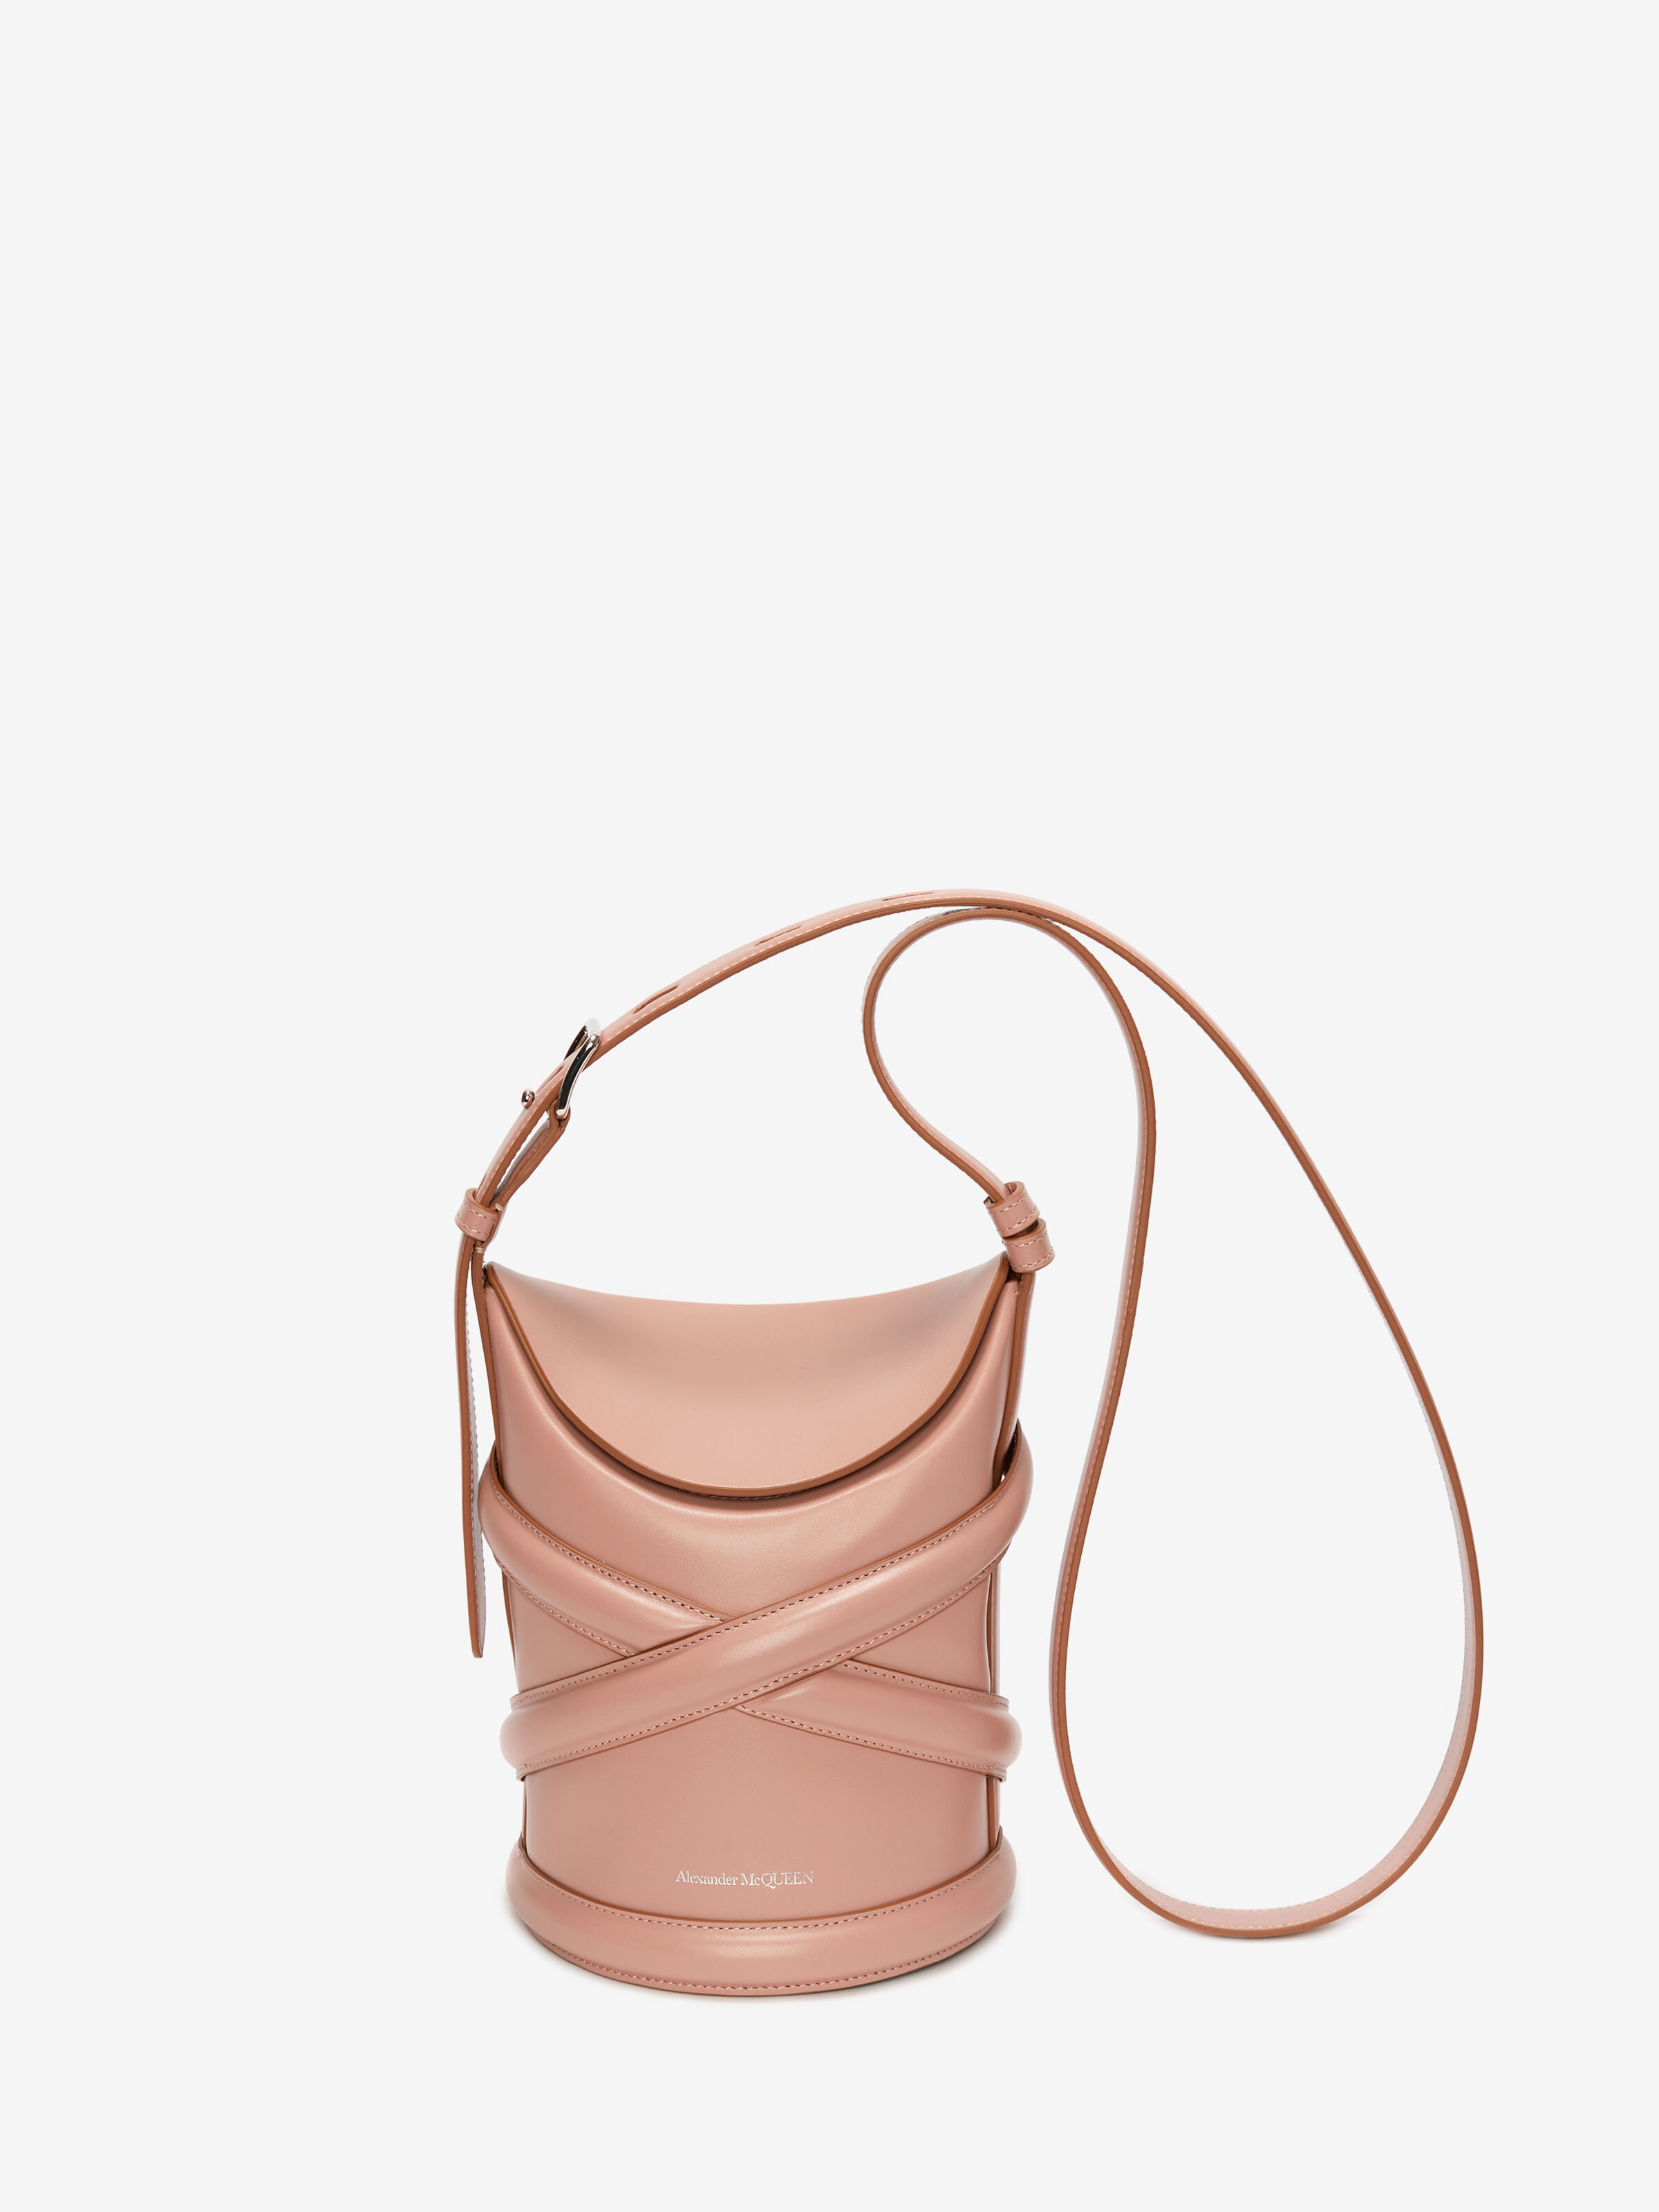 Alexander Mcqueen The Curve In Rose Gold